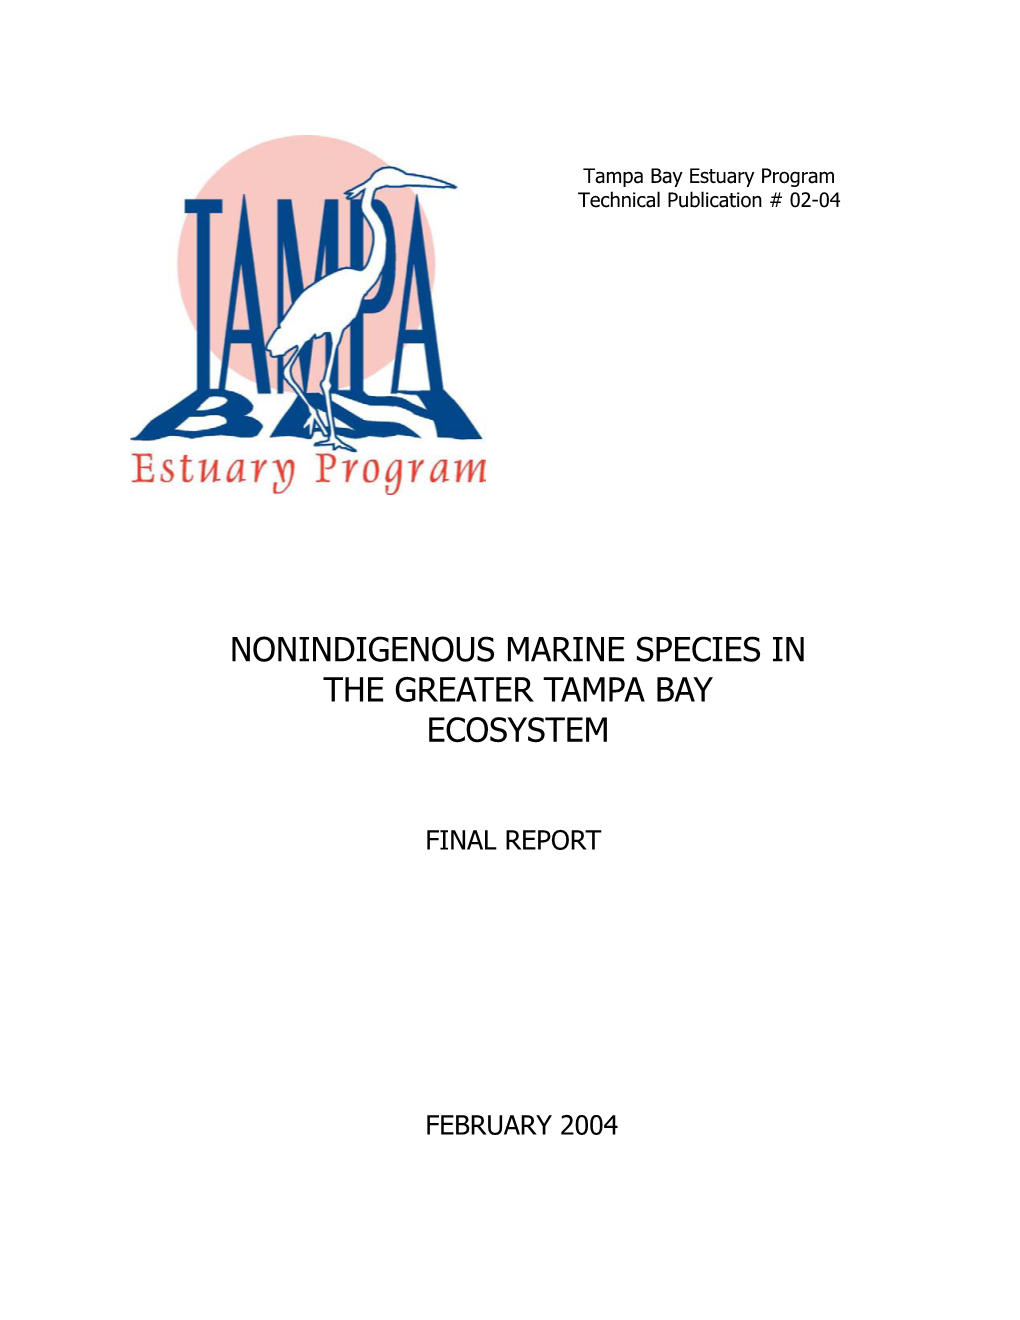 Nonindigenous Marine Species in the Greater Tampa Bay Ecosystem